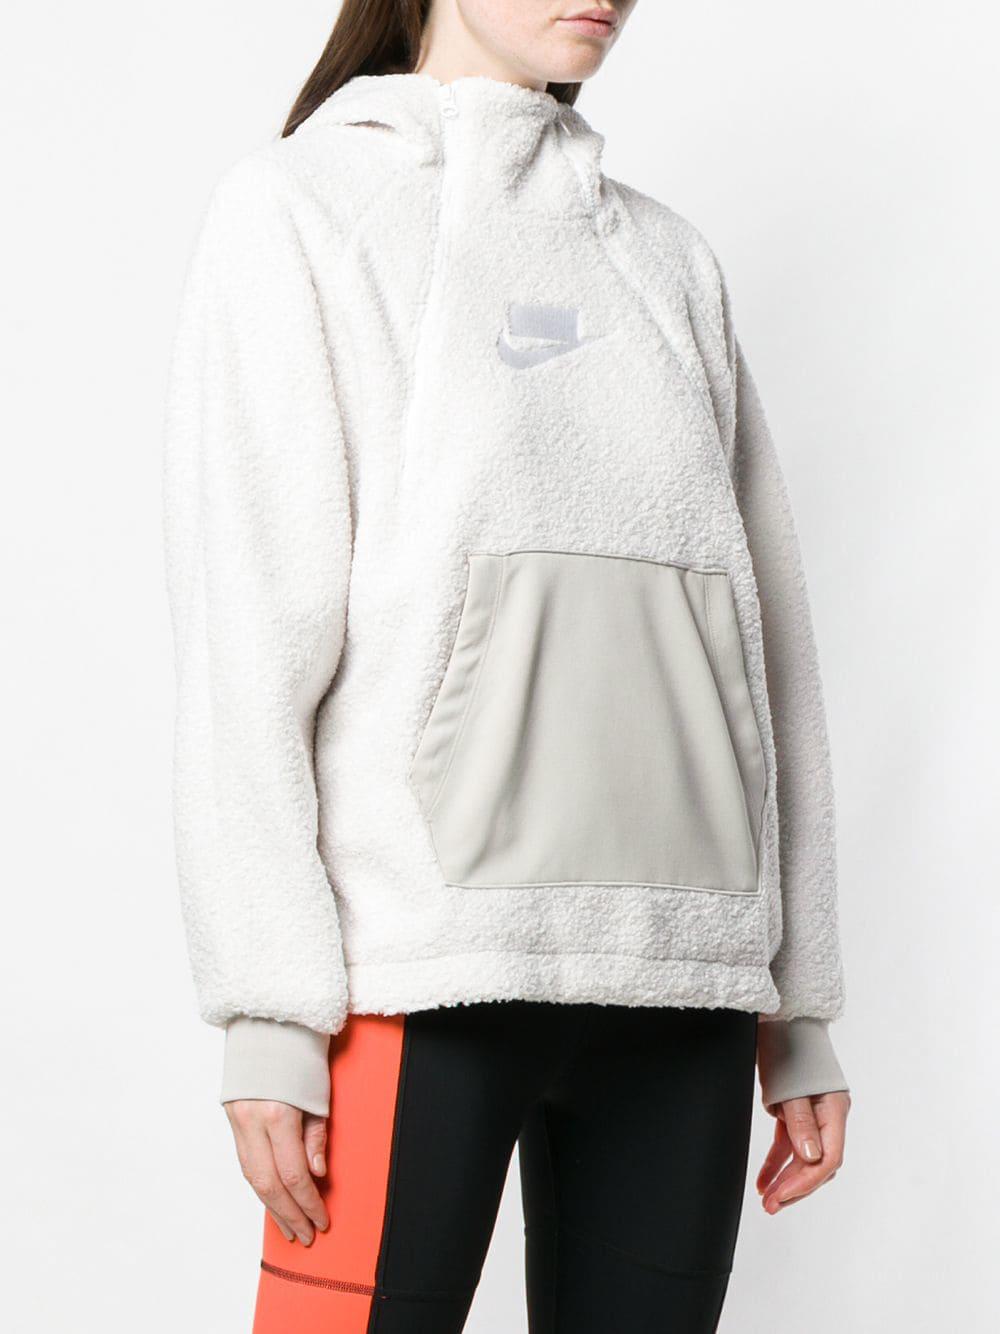 furry nike pullover